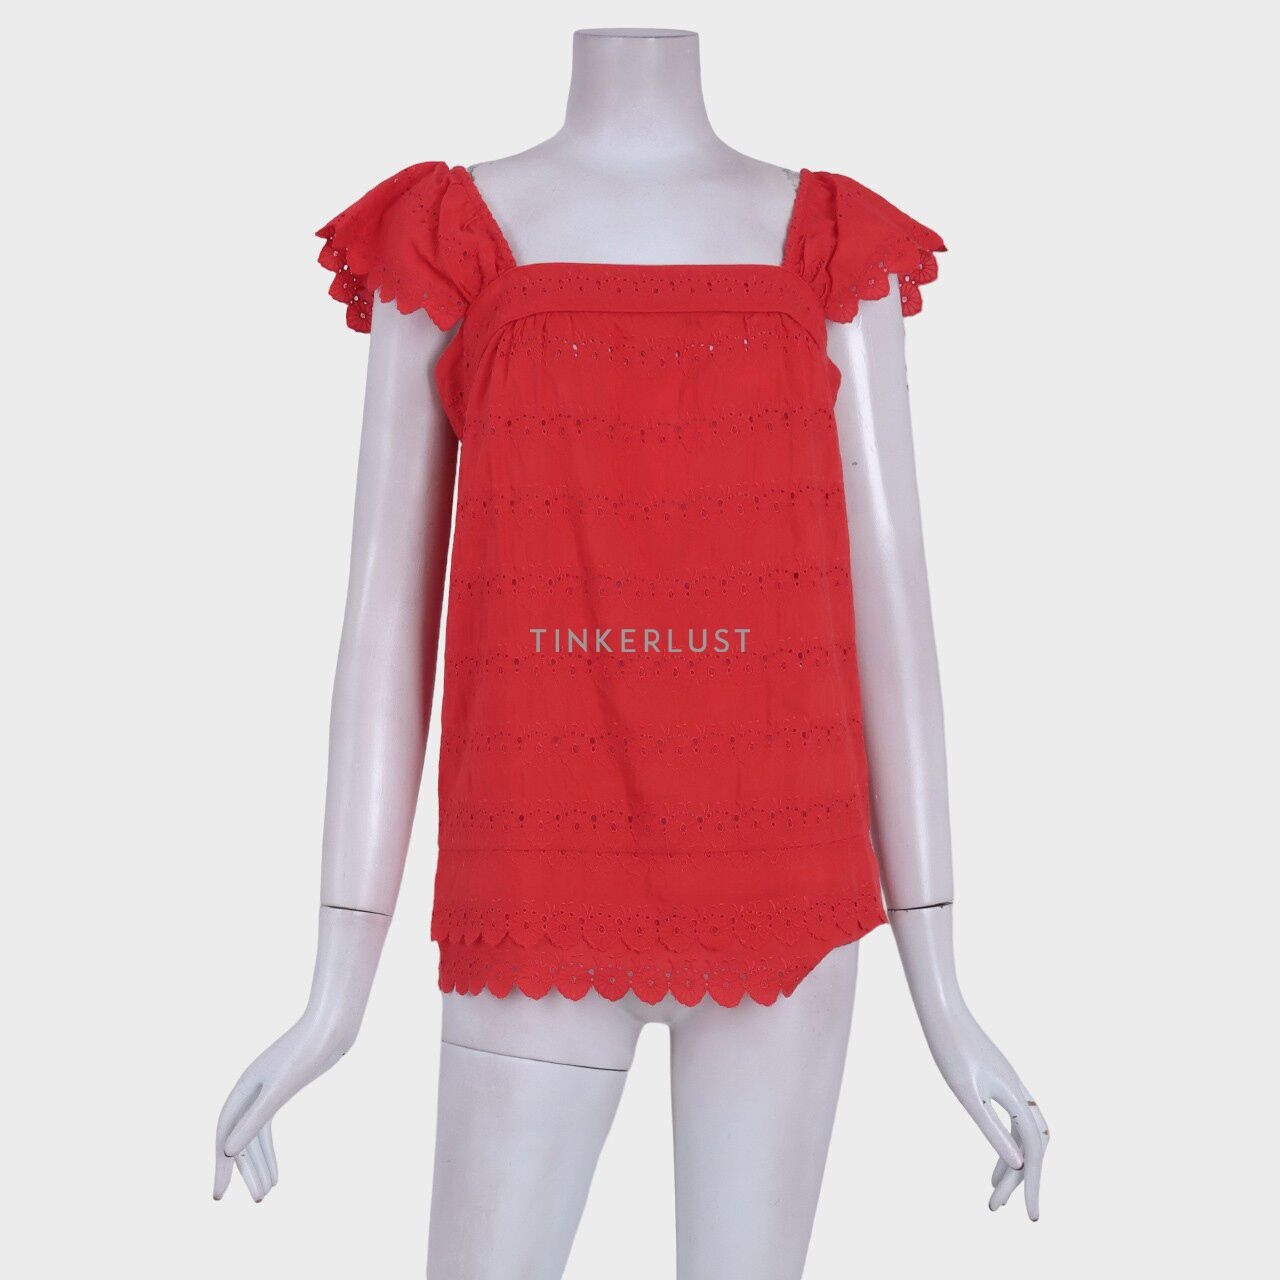 Juicy Couture Red Sleeveless